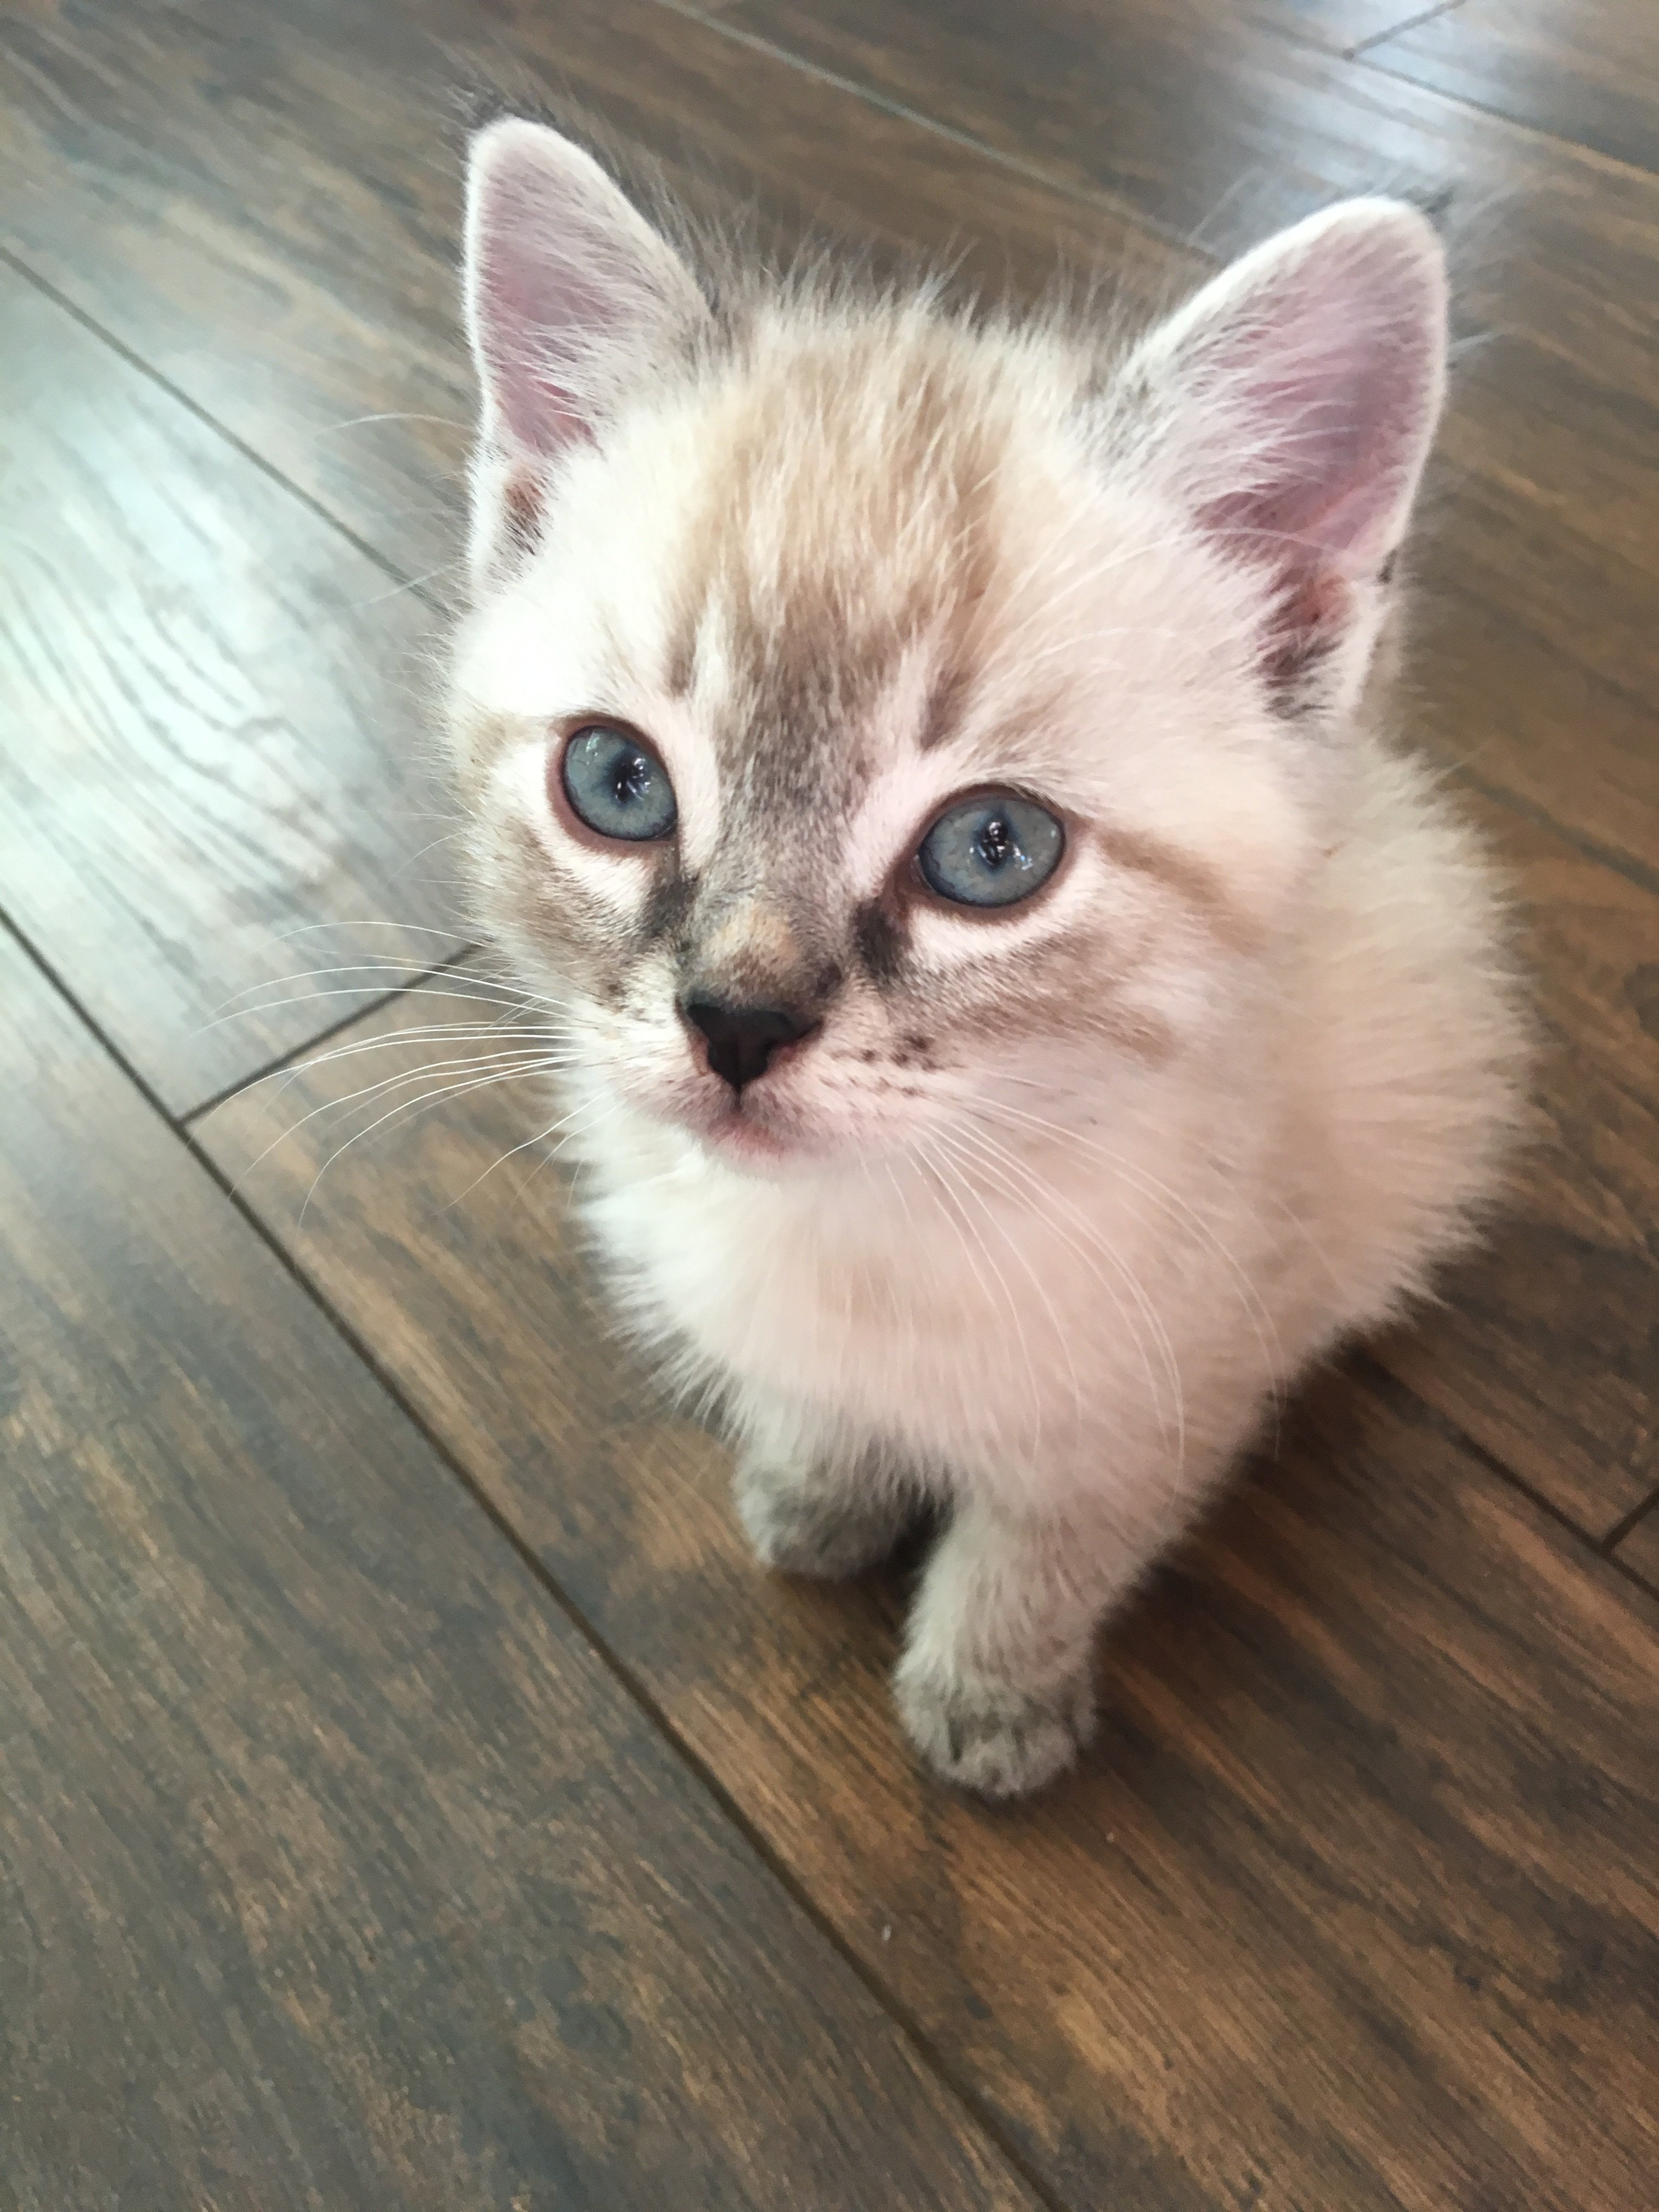 Does My Kitten Have Fever Coat? TheCatSite